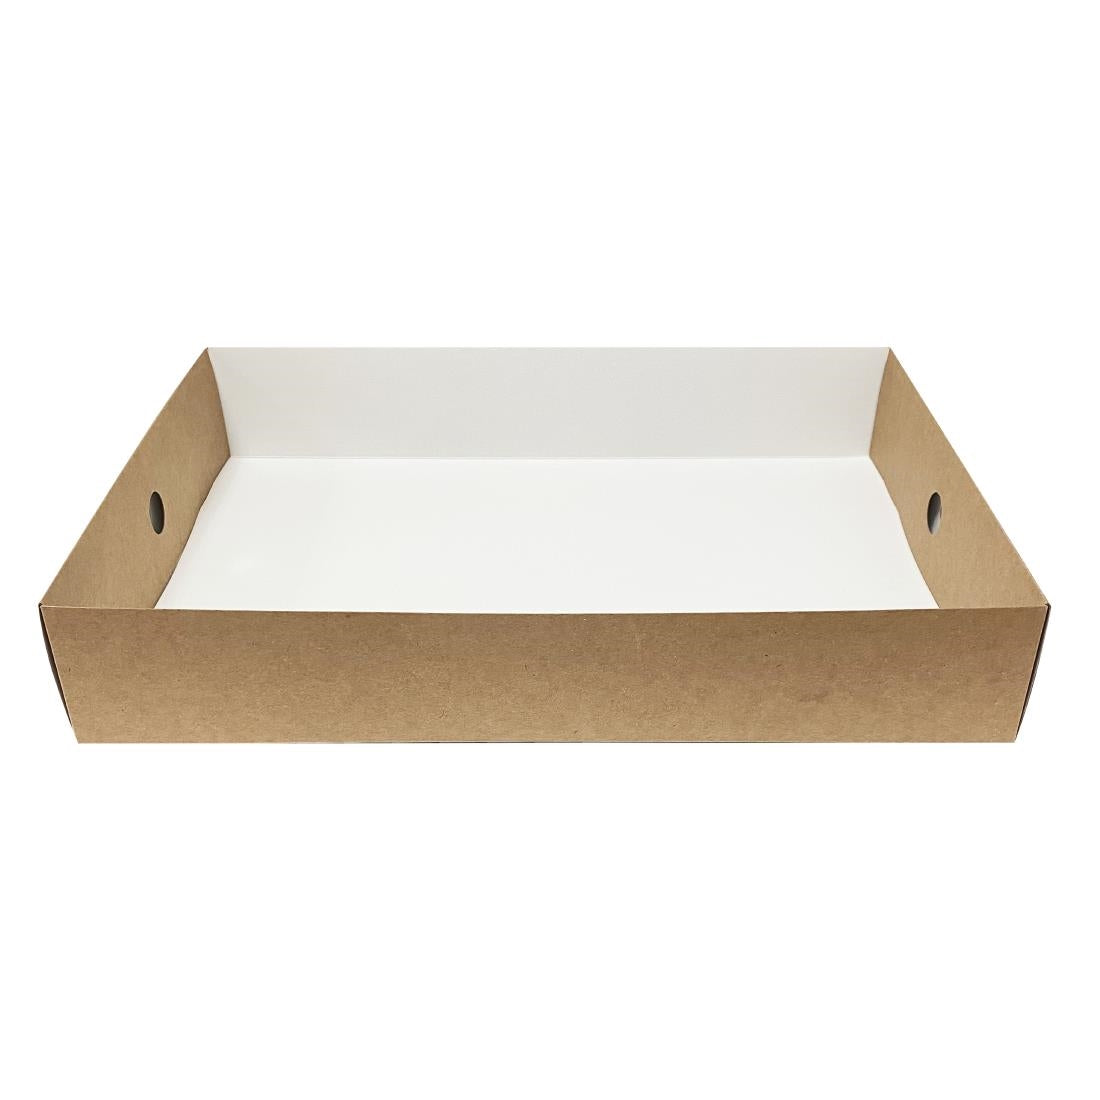 FT676 Fiesta Recyclable Insert For Large Platter Box Full Sized (Pack of 50) JD Catering Equipment Solutions Ltd